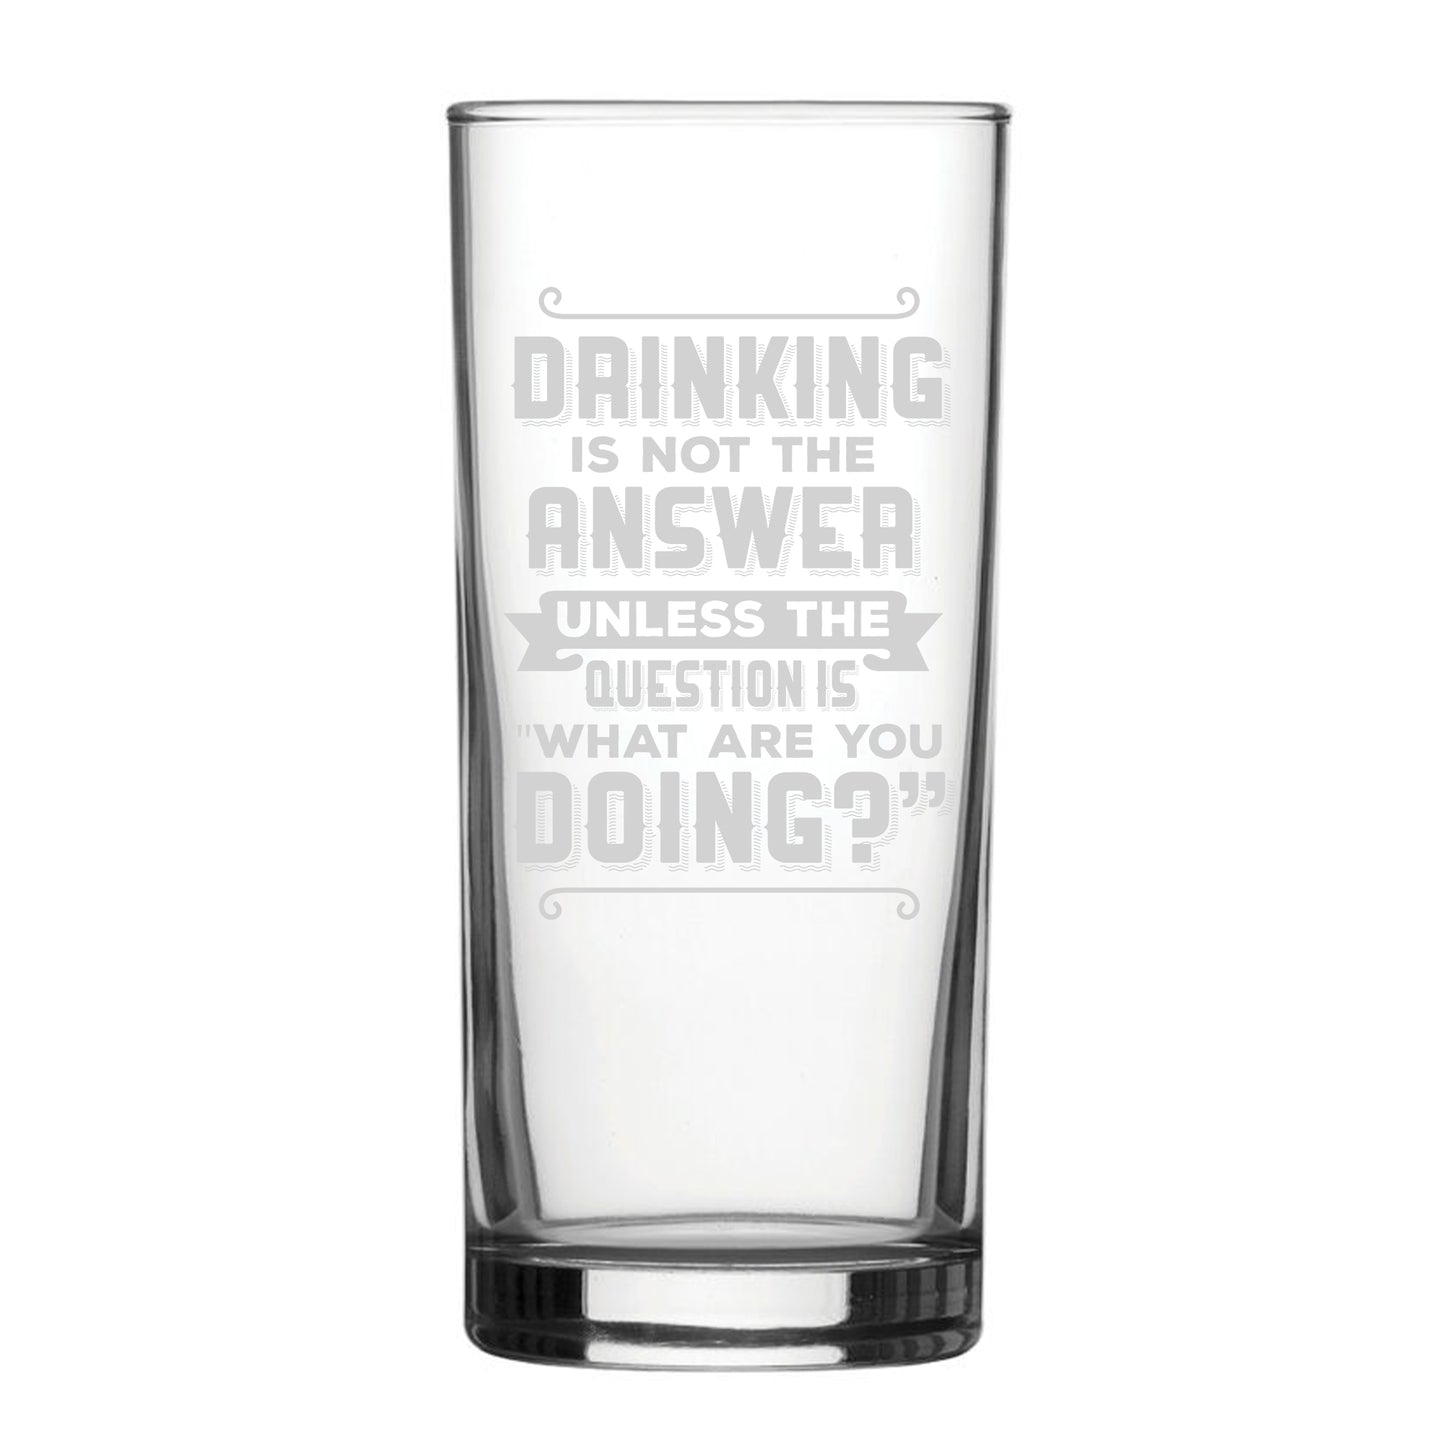 Drinking Is Not The Answer, Unless The Question Is What Are You Doing? - Engraved Novelty Hiball Glass Image 2